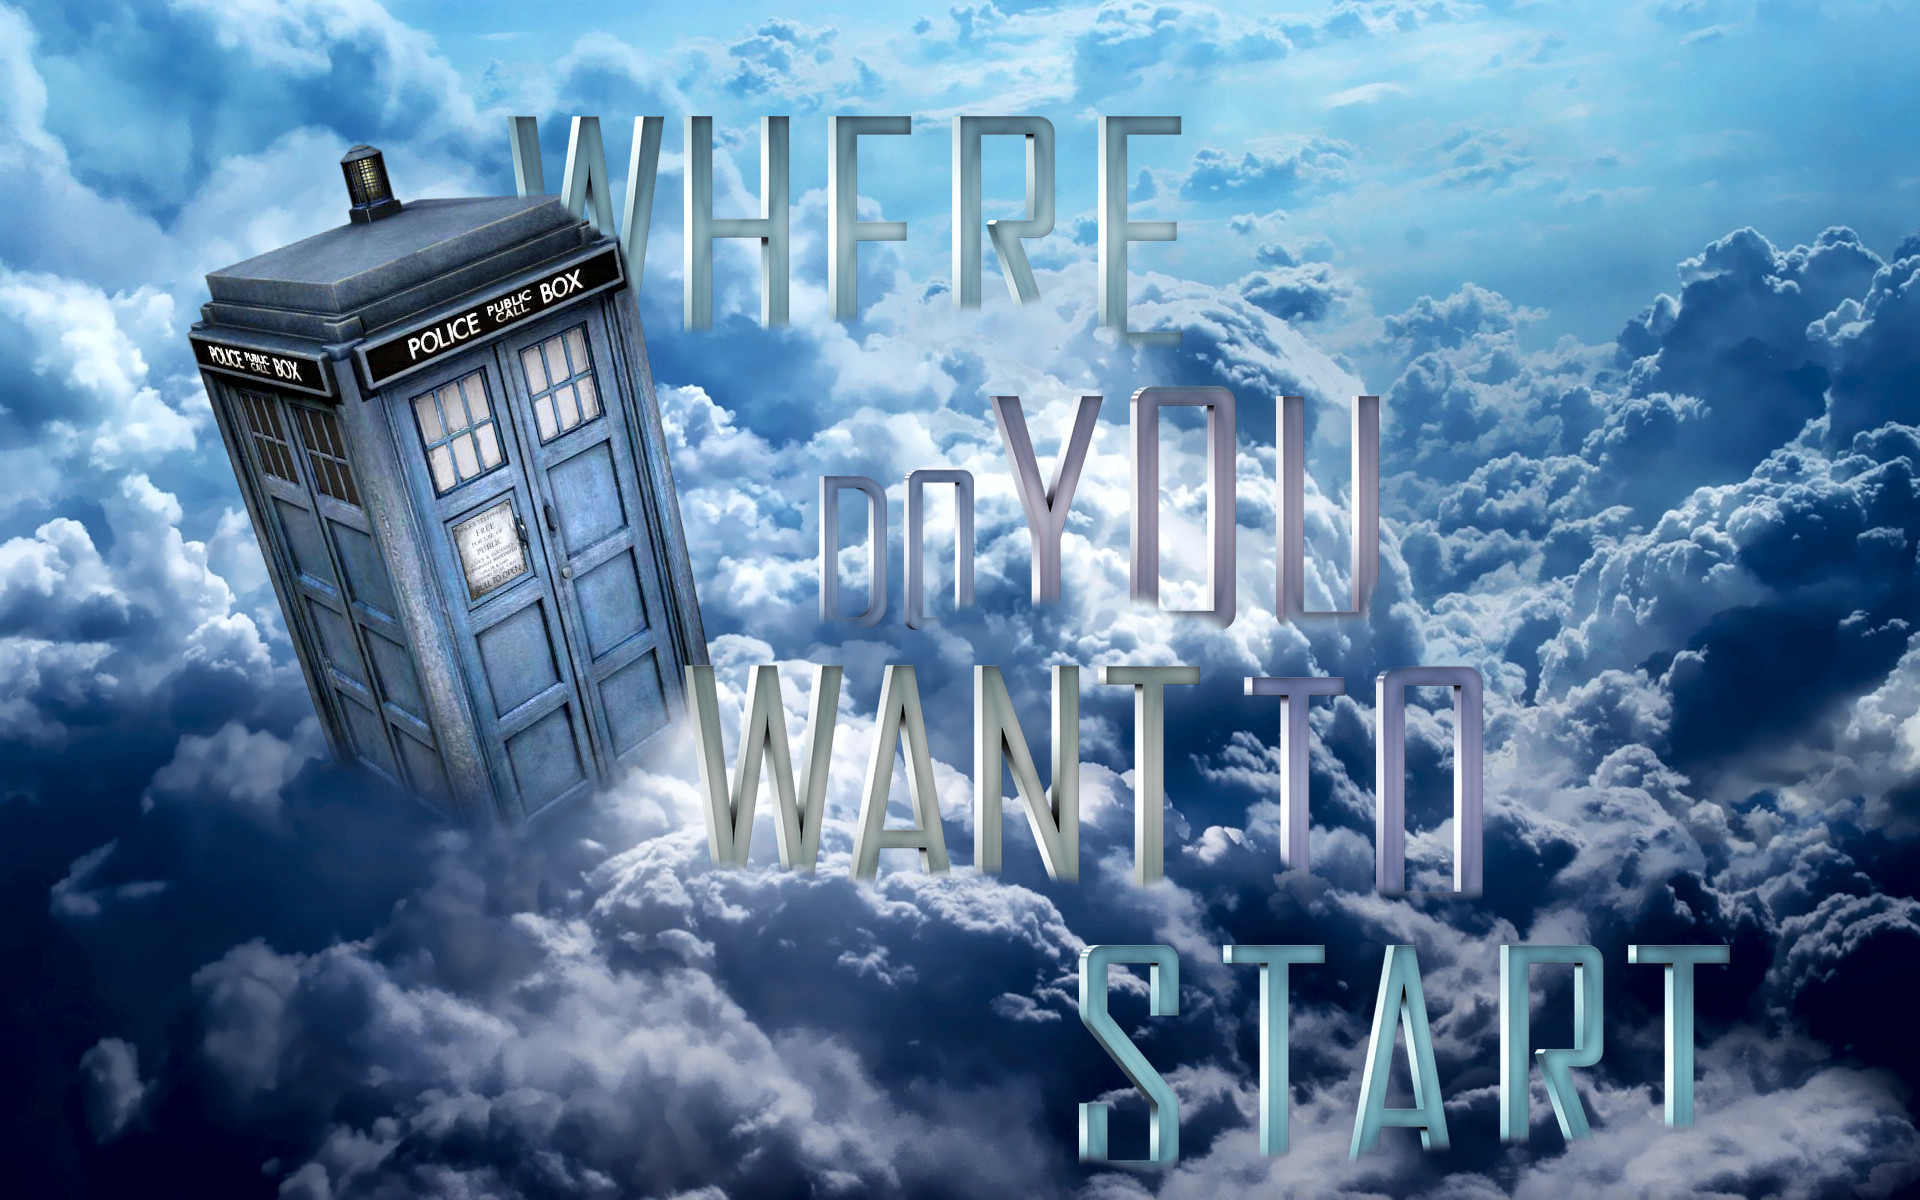 1920x1200 "Where do you want to start" a wallpaper i made today, requests welcomed.